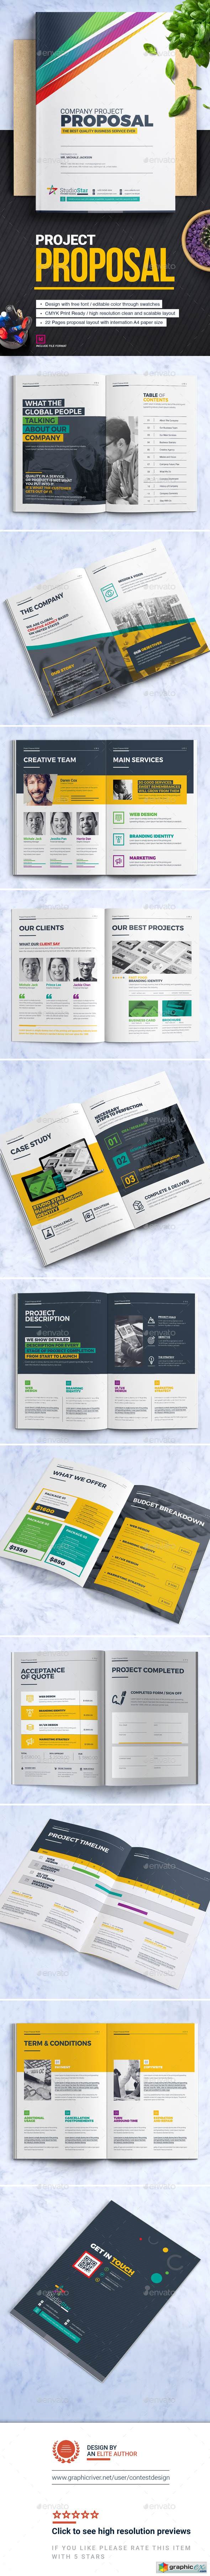 Project Proposal Template 20738407